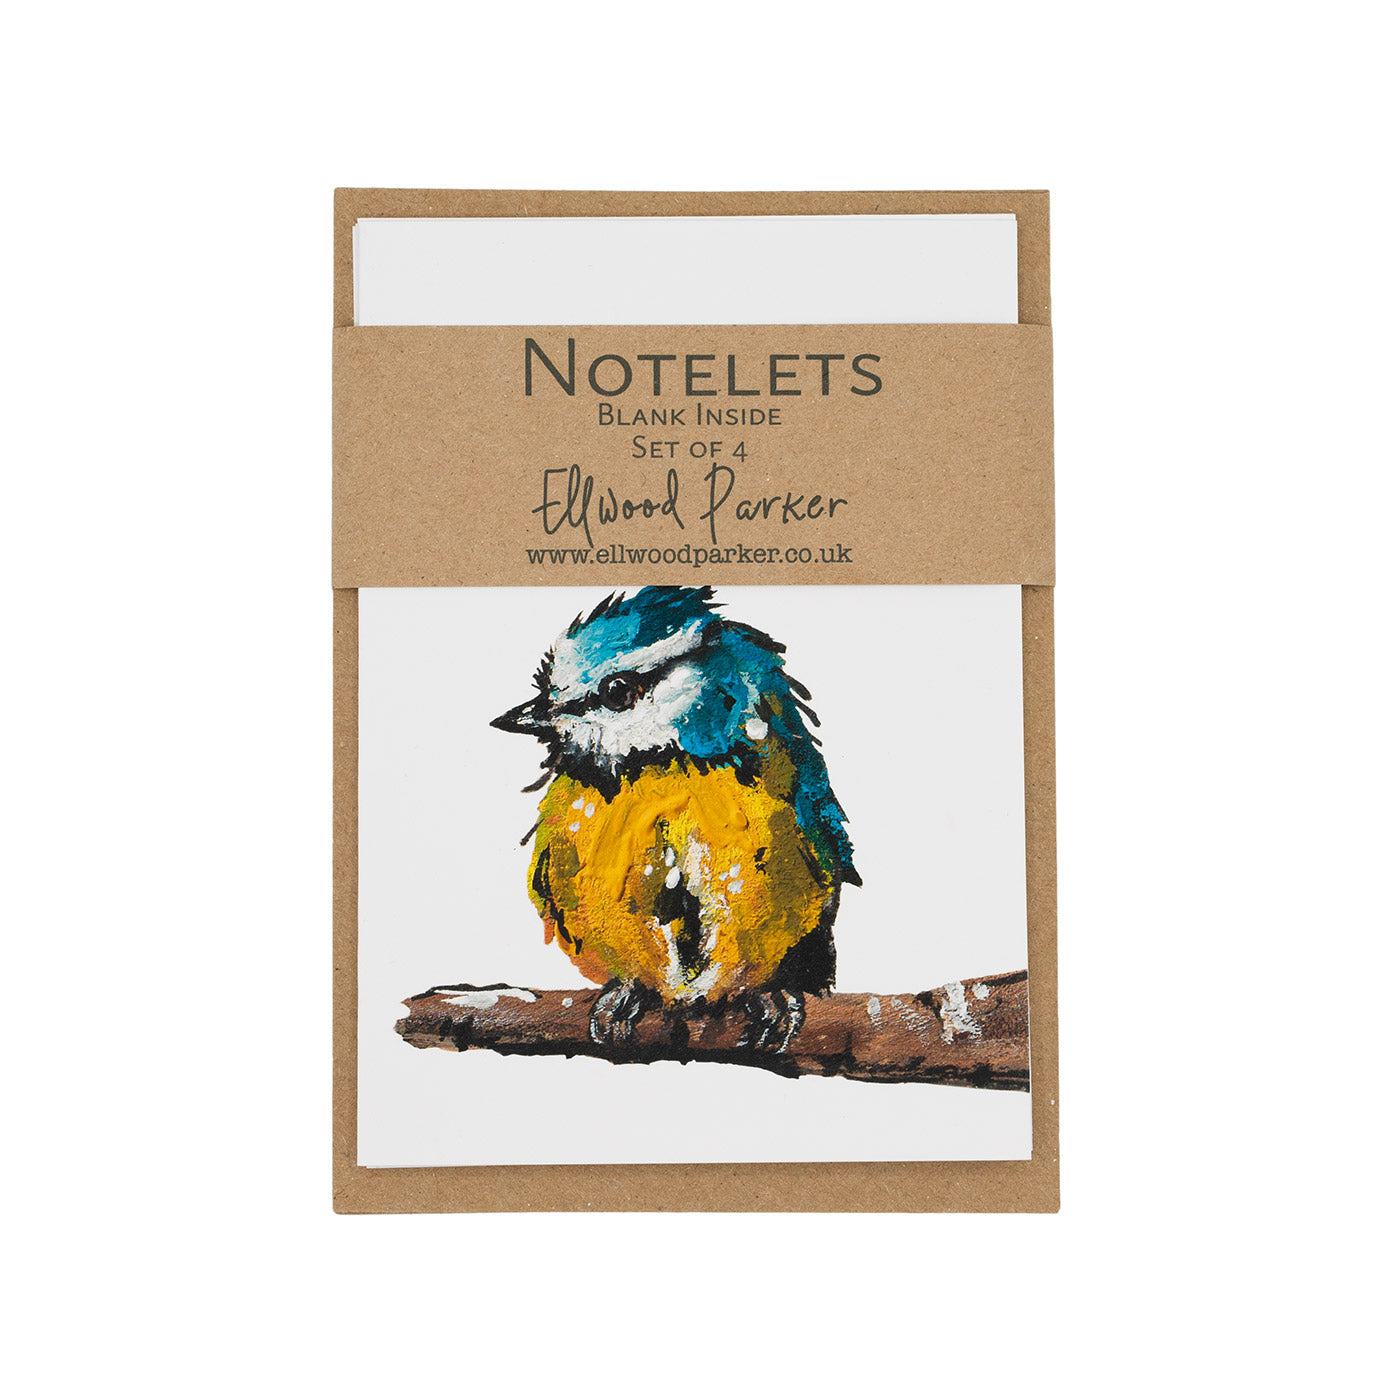 Image of a set of notecards with an illustration of a Blue Tit bird.